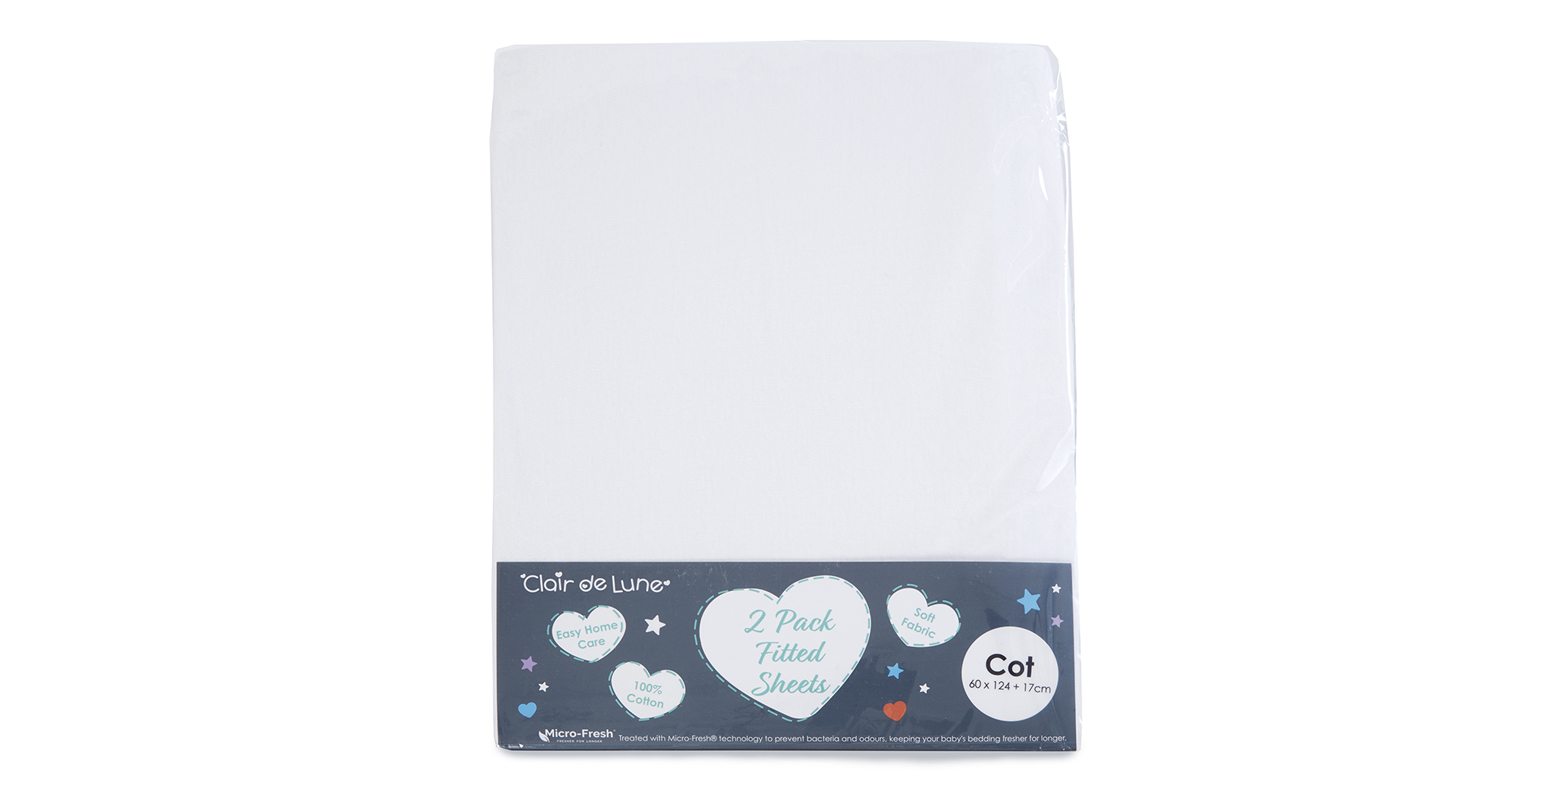 Clair De Lune Fitted Sheet Twin Pack White Cot